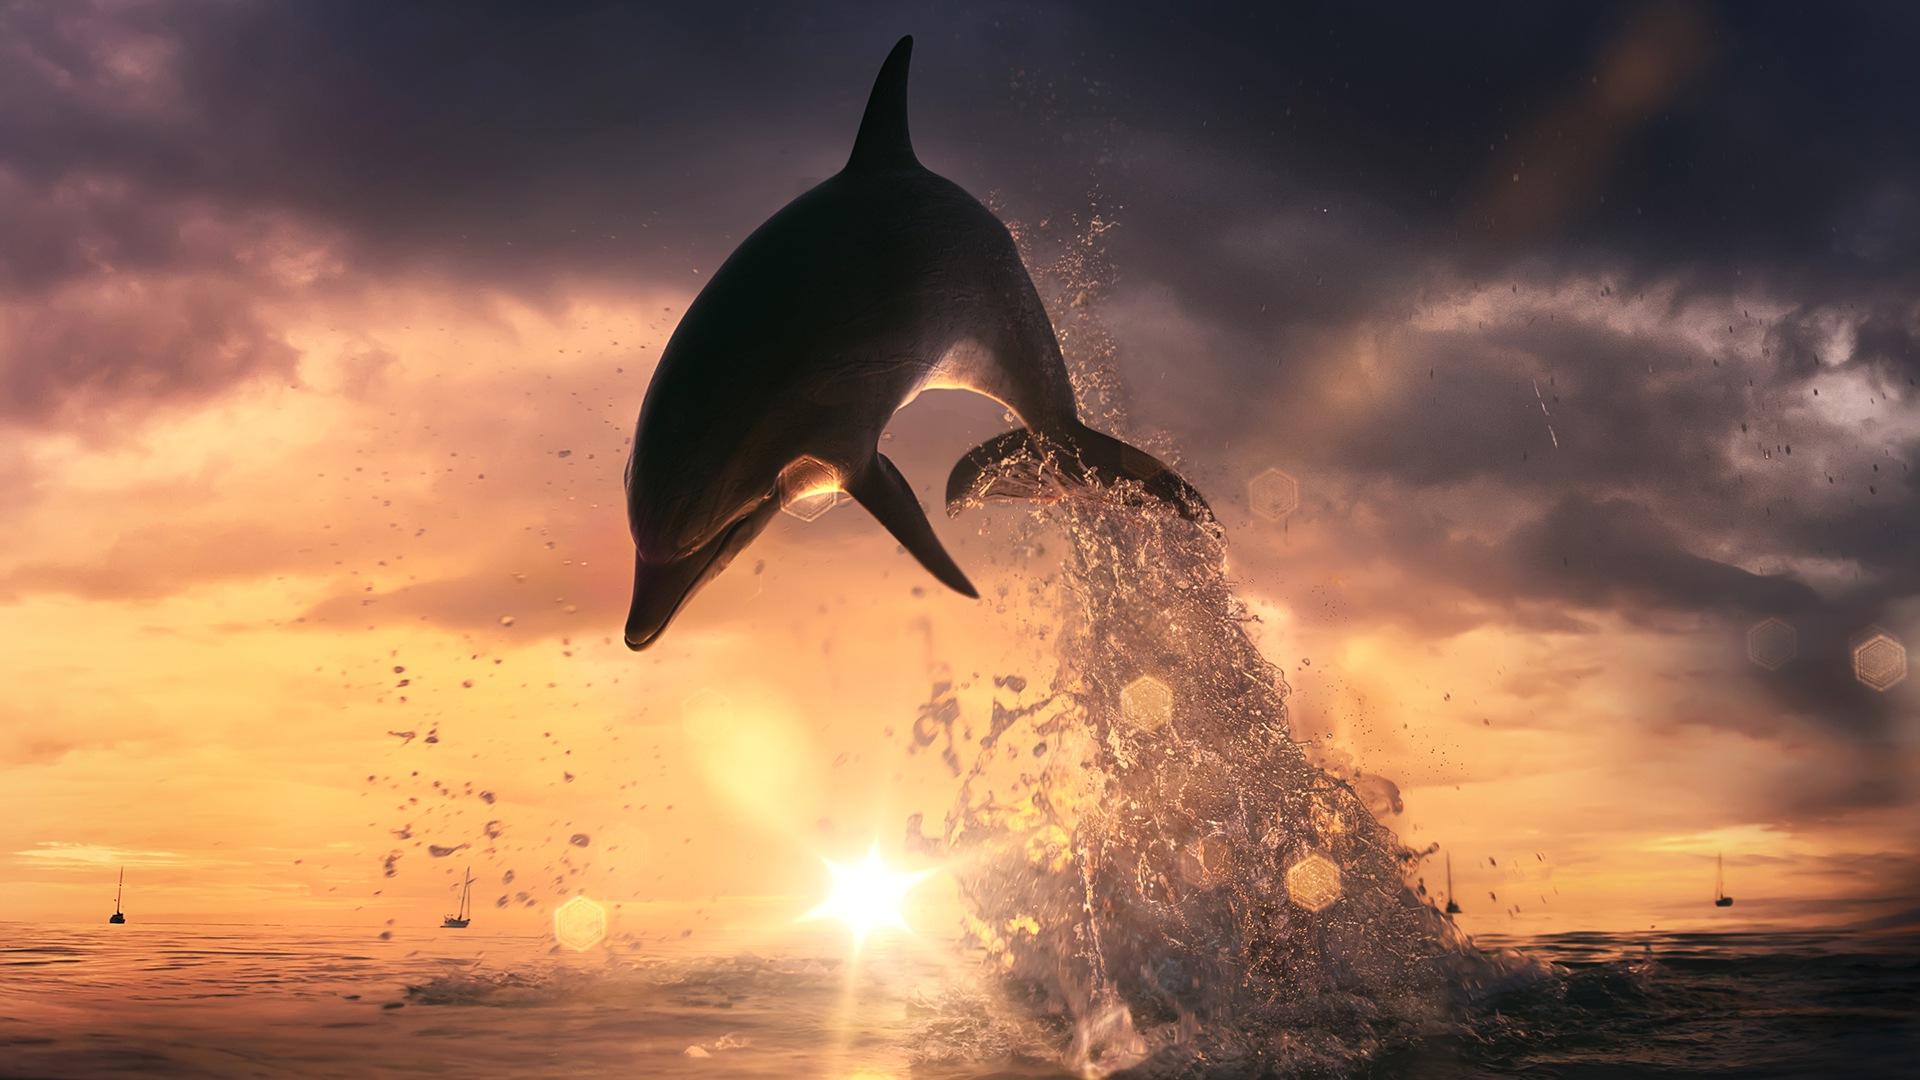 100+] Cute Dolphin Wallpapers | Wallpapers.com